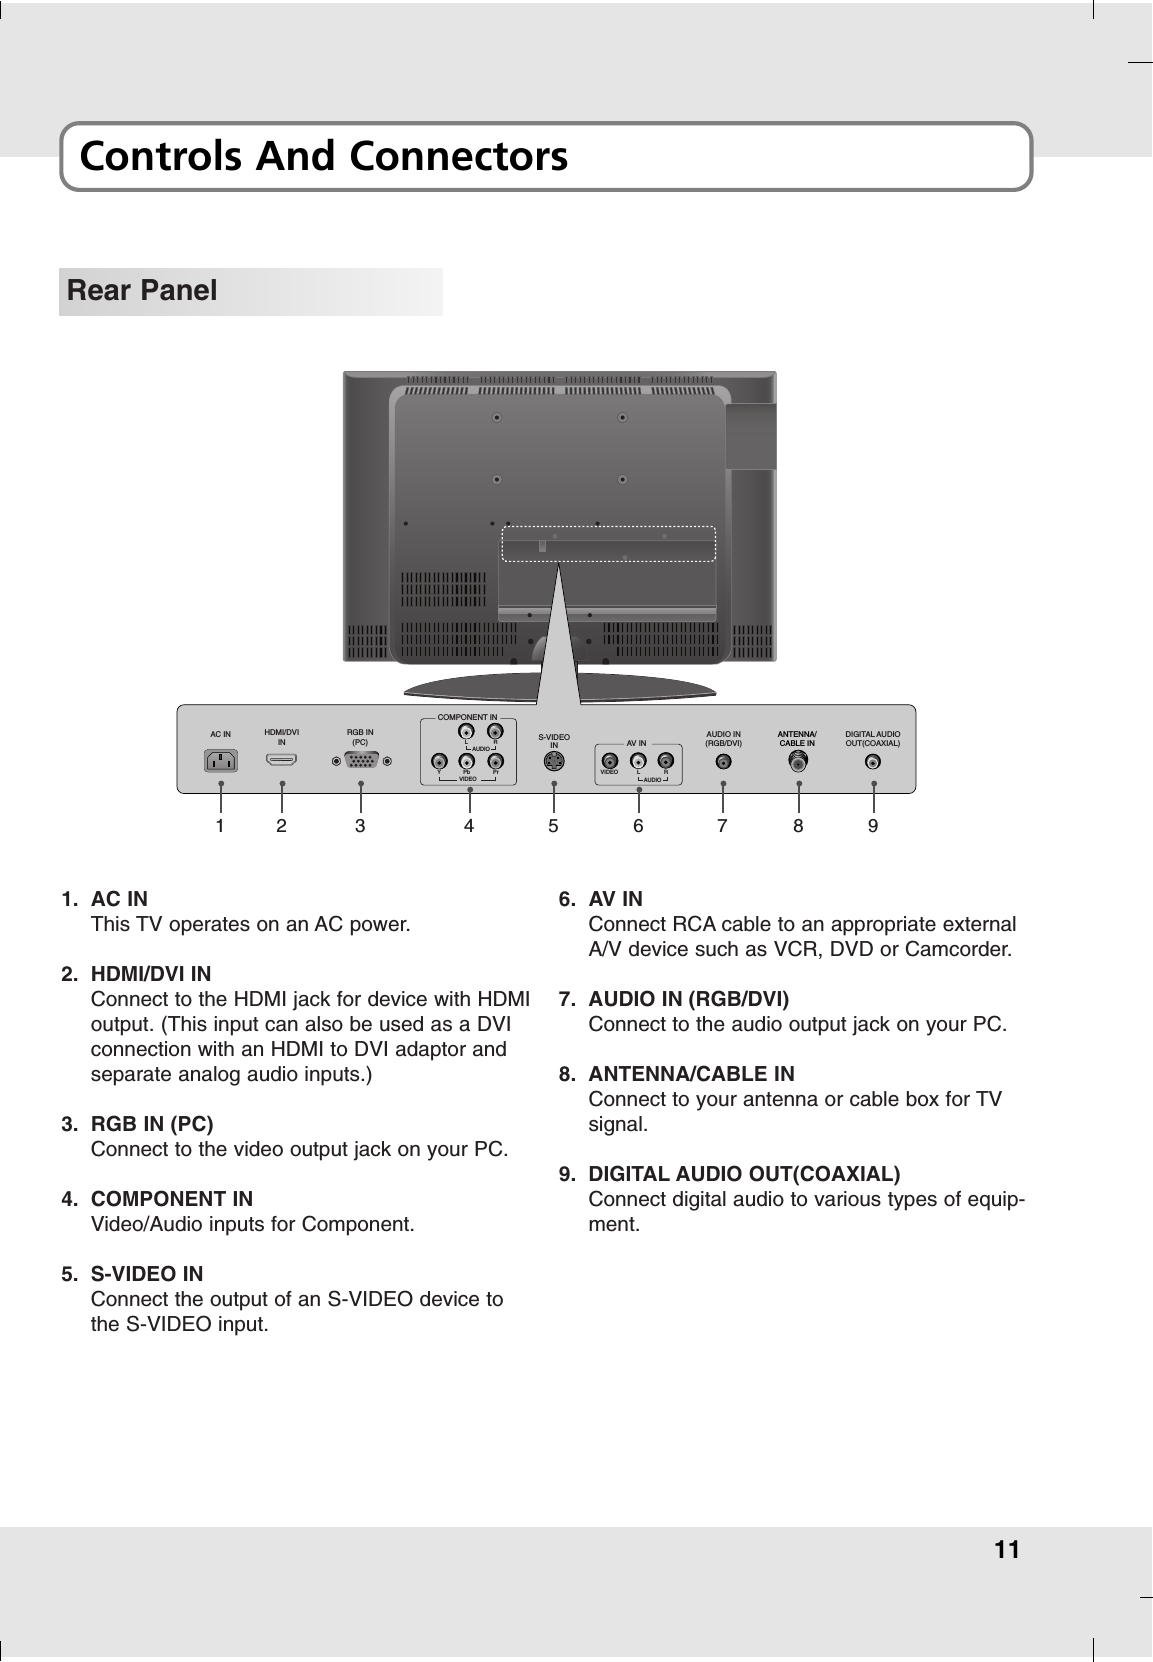 11Controls And ConnectorsRear PanelHDMI/DVIINRGB IN(PC)AUDIO IN(RGB/DVI)DIGITAL AUDIOOUT(COAXIAL)S-VIDEOINANTENNA/CABLE IN3 5 7 8 92VIDEOYPb PrLRCOMPONENT INAUDIO AV INAUDIOLVIDEO R4 6AC IN11. AC INThis TV operates on an AC power.2. HDMI/DVI INConnect to the HDMI jack for device with HDMIoutput. (This input can also be used as a DVIconnection with an HDMI to DVI adaptor andseparate analog audio inputs.)3. RGB IN (PC)Connect to the video output jack on your PC.4. COMPONENT INVideo/Audio inputs for Component.5. S-VIDEO INConnect the output of an S-VIDEO device tothe S-VIDEO input.6. AV INConnect RCA cable to an appropriate externalA/V device such as VCR, DVD or Camcorder.7. AUDIO IN (RGB/DVI)Connect to the audio output jack on your PC.8. ANTENNA/CABLE INConnect to your antenna or cable box for TVsignal.9. DIGITAL AUDIO OUT(COAXIAL)Connect digital audio to various types of equip-ment.